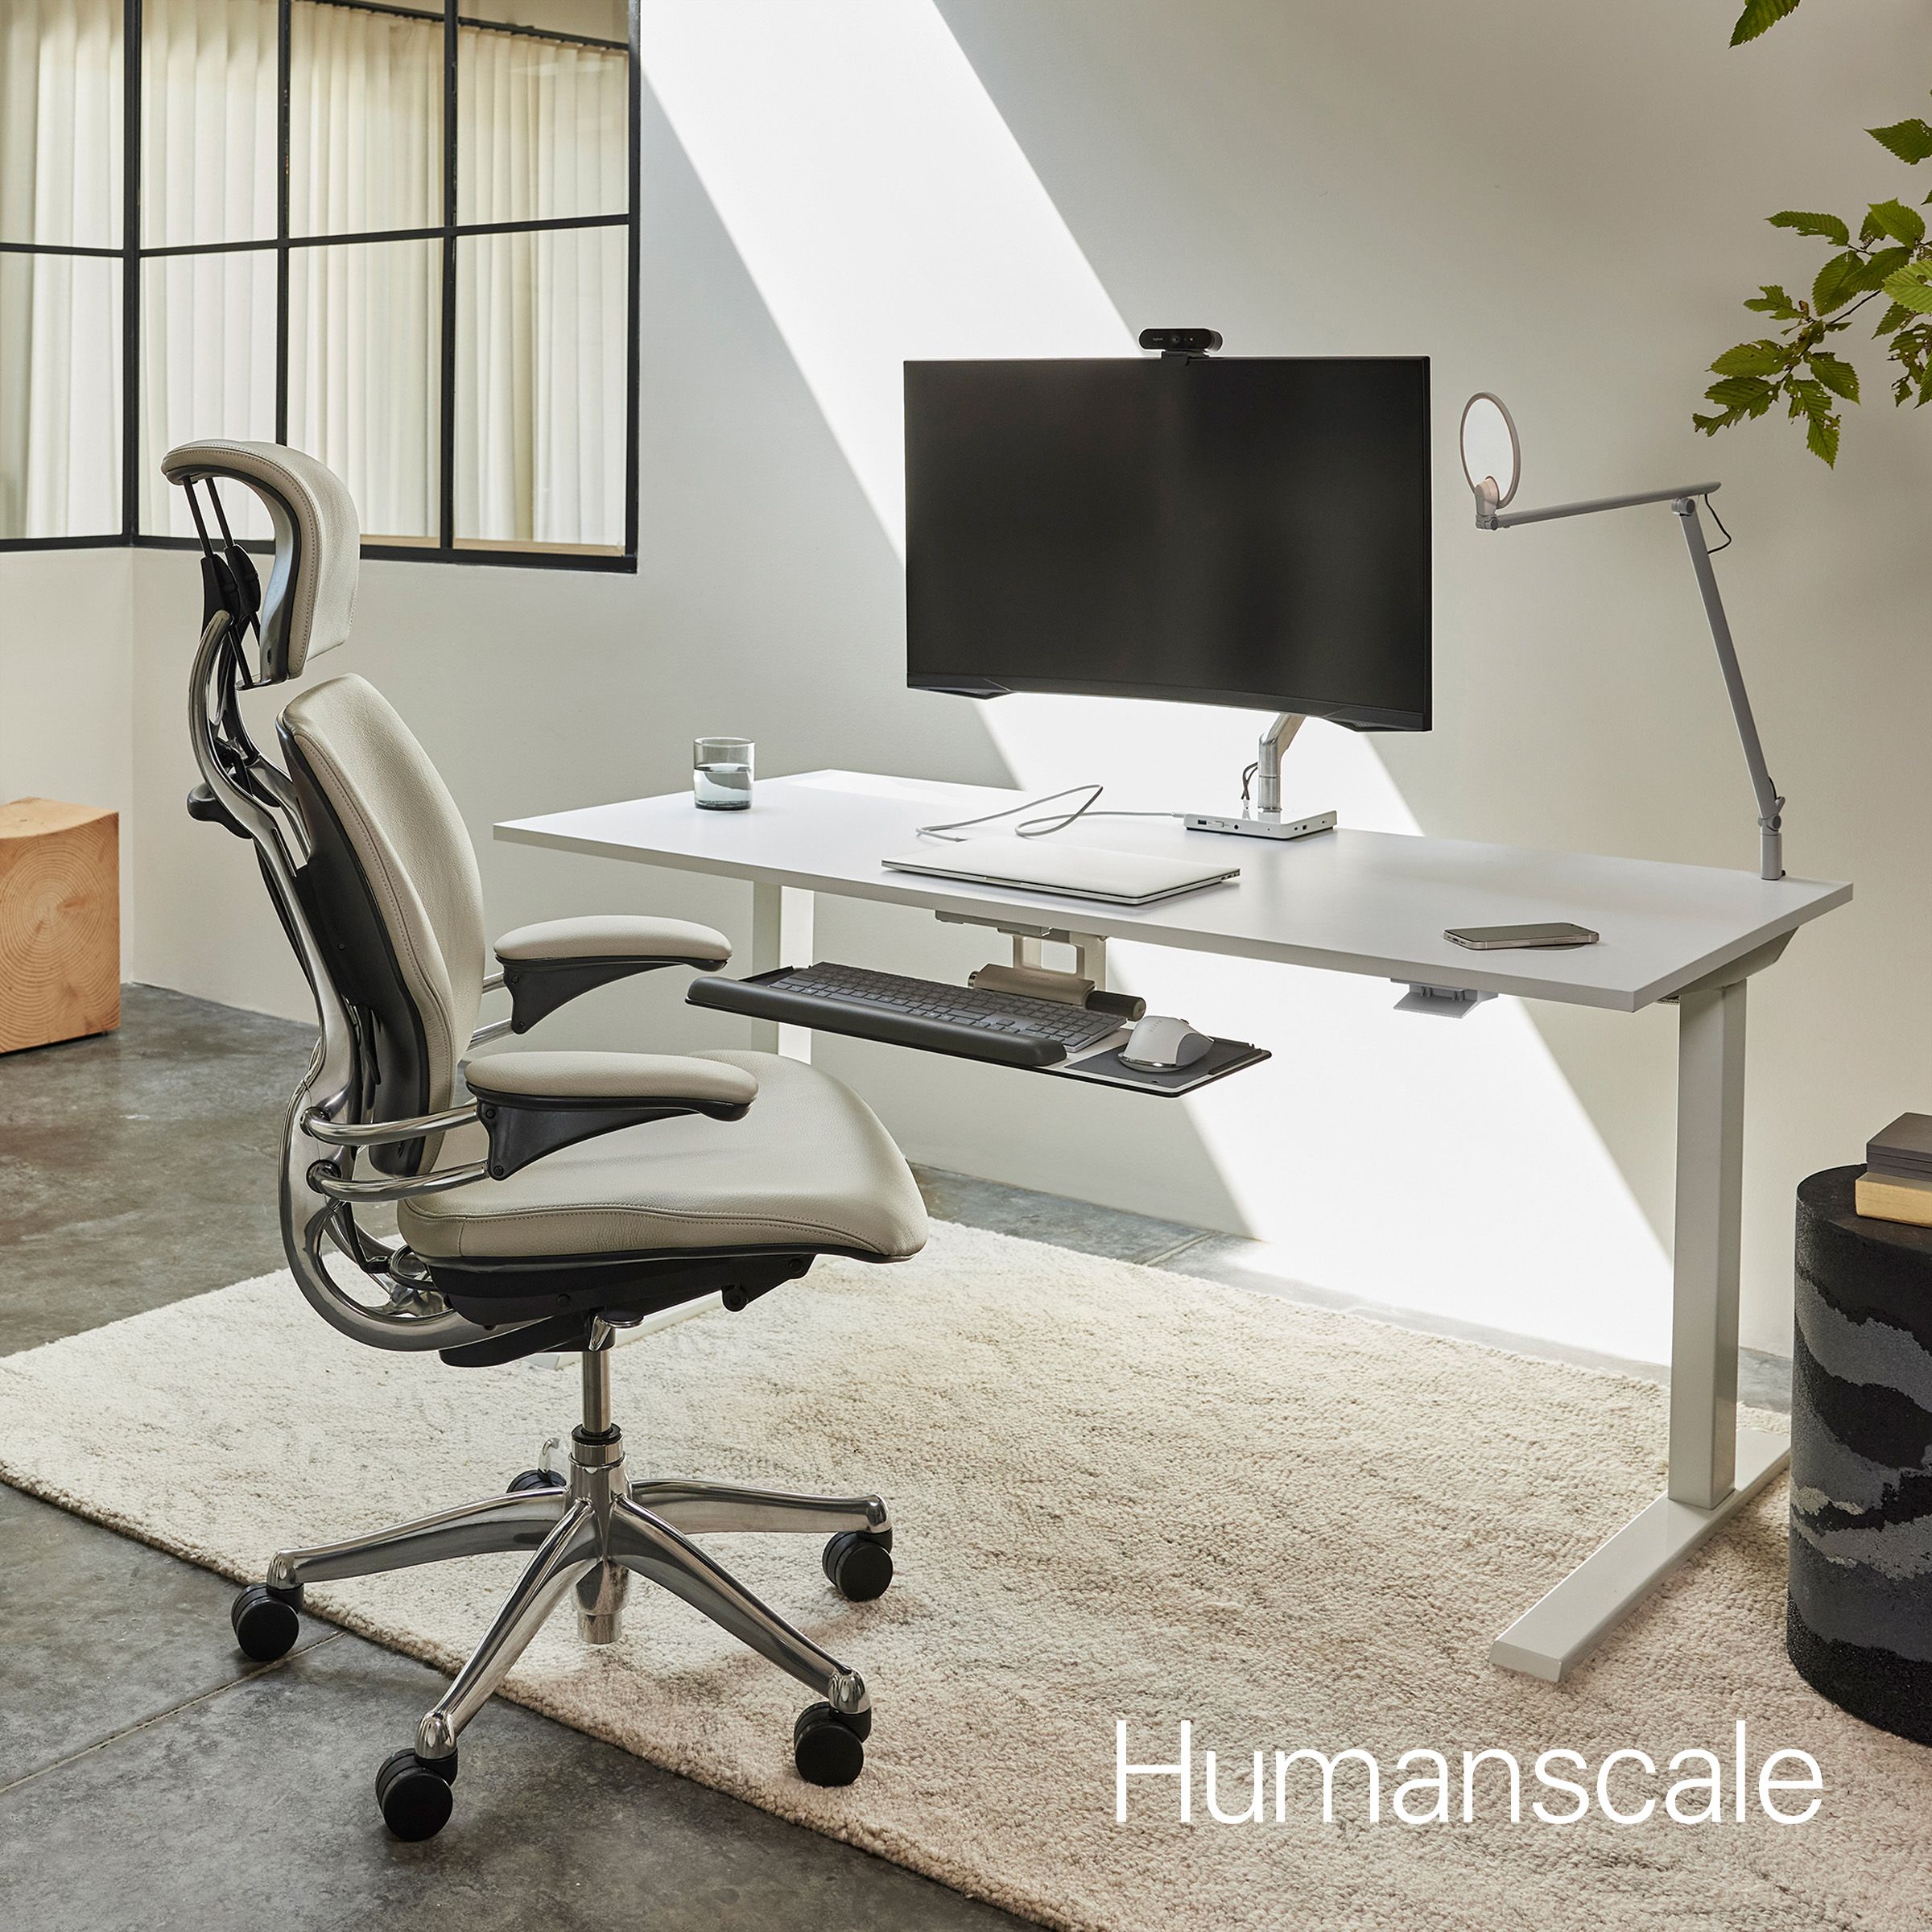 Product shot of Humanscale chair in front of desk